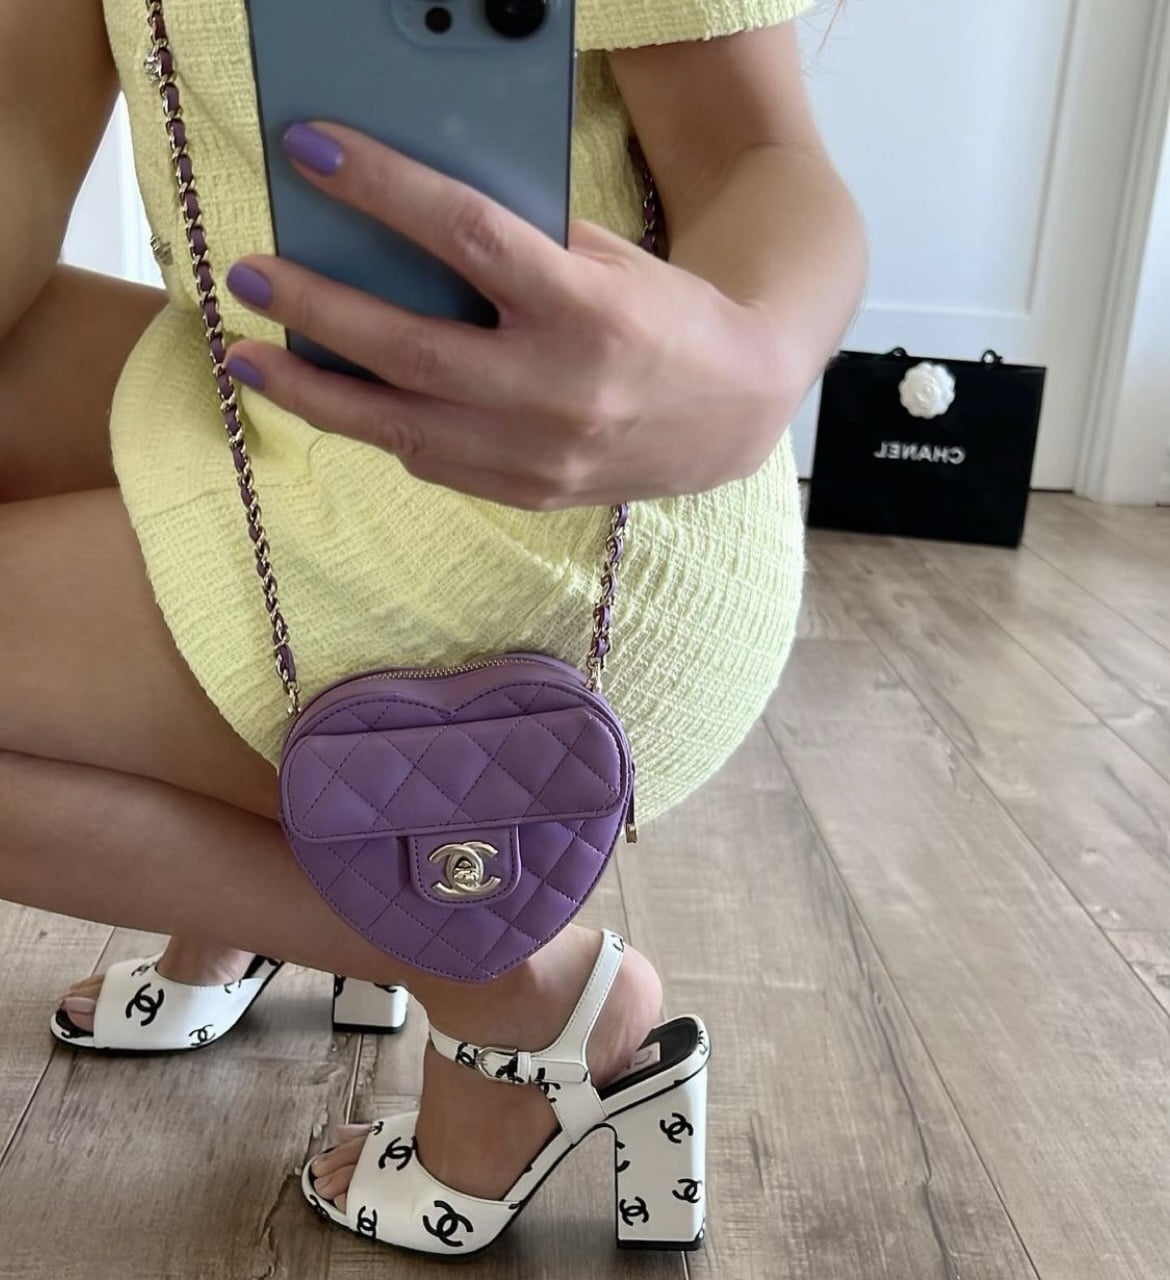 chanel wallet phone case